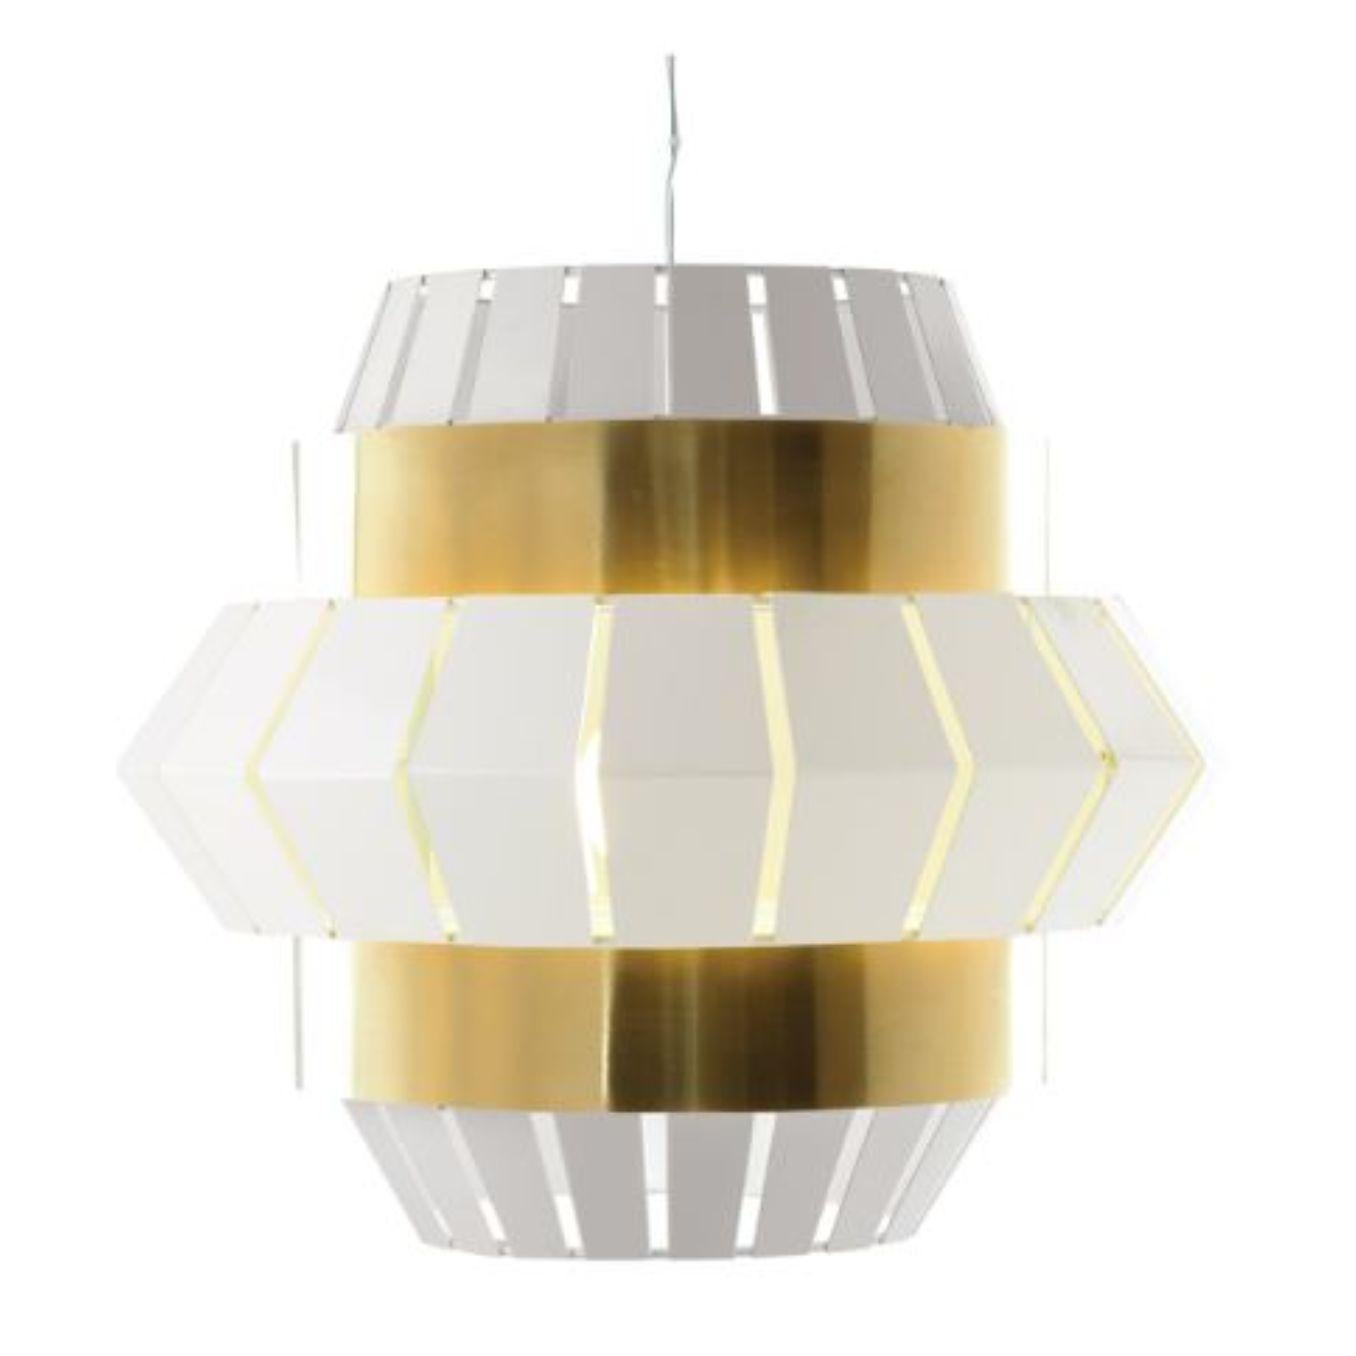 Ivory and Salmon comb suspension lamp with brass ring by Dooq
Dimensions: W 74 x D 74 x H 60 cm
Materials: lacquered metal, polished brass.
Also available in different colors and materials.

Information:
230V/50Hz
E27/1x20W